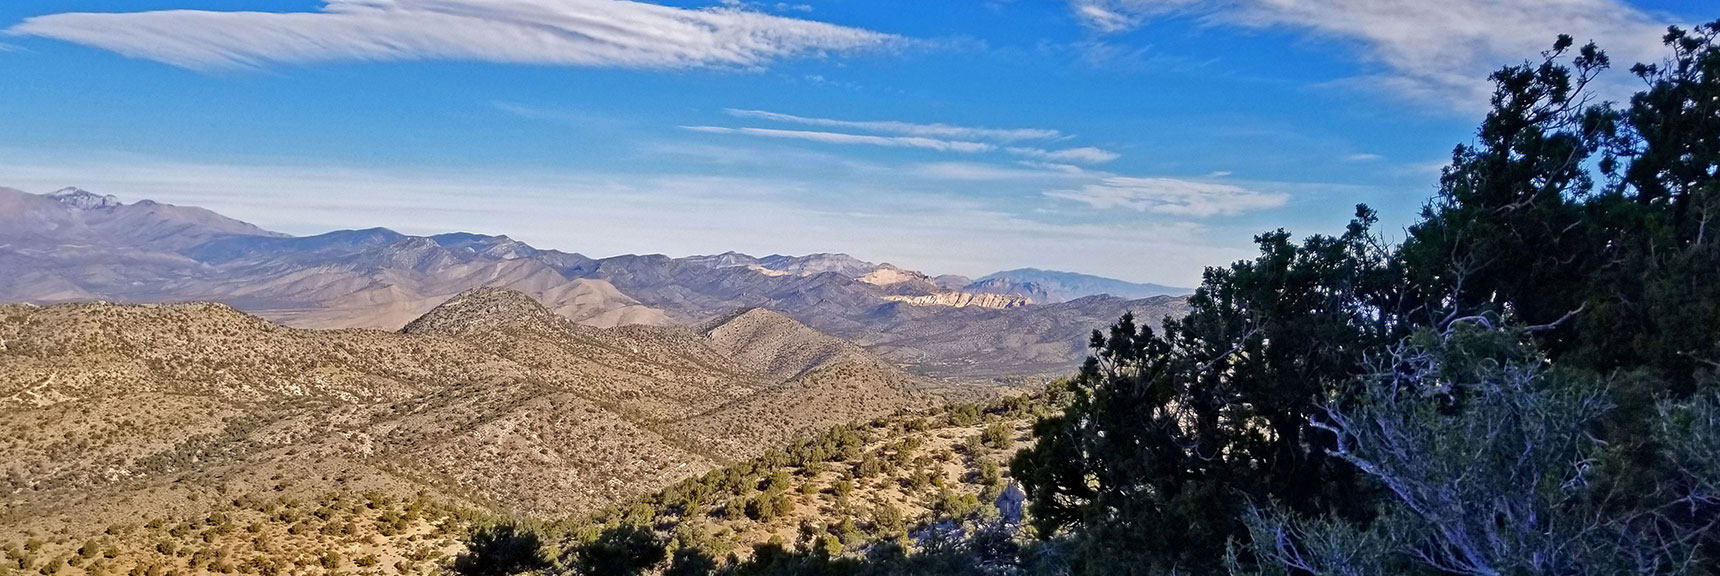 View Toward Mt. Charleston Wilderness, Rainbow Mts and La Madre Mts | Potosi Mountain Northern Cliffs Trail | Spring Mountains, Nevada